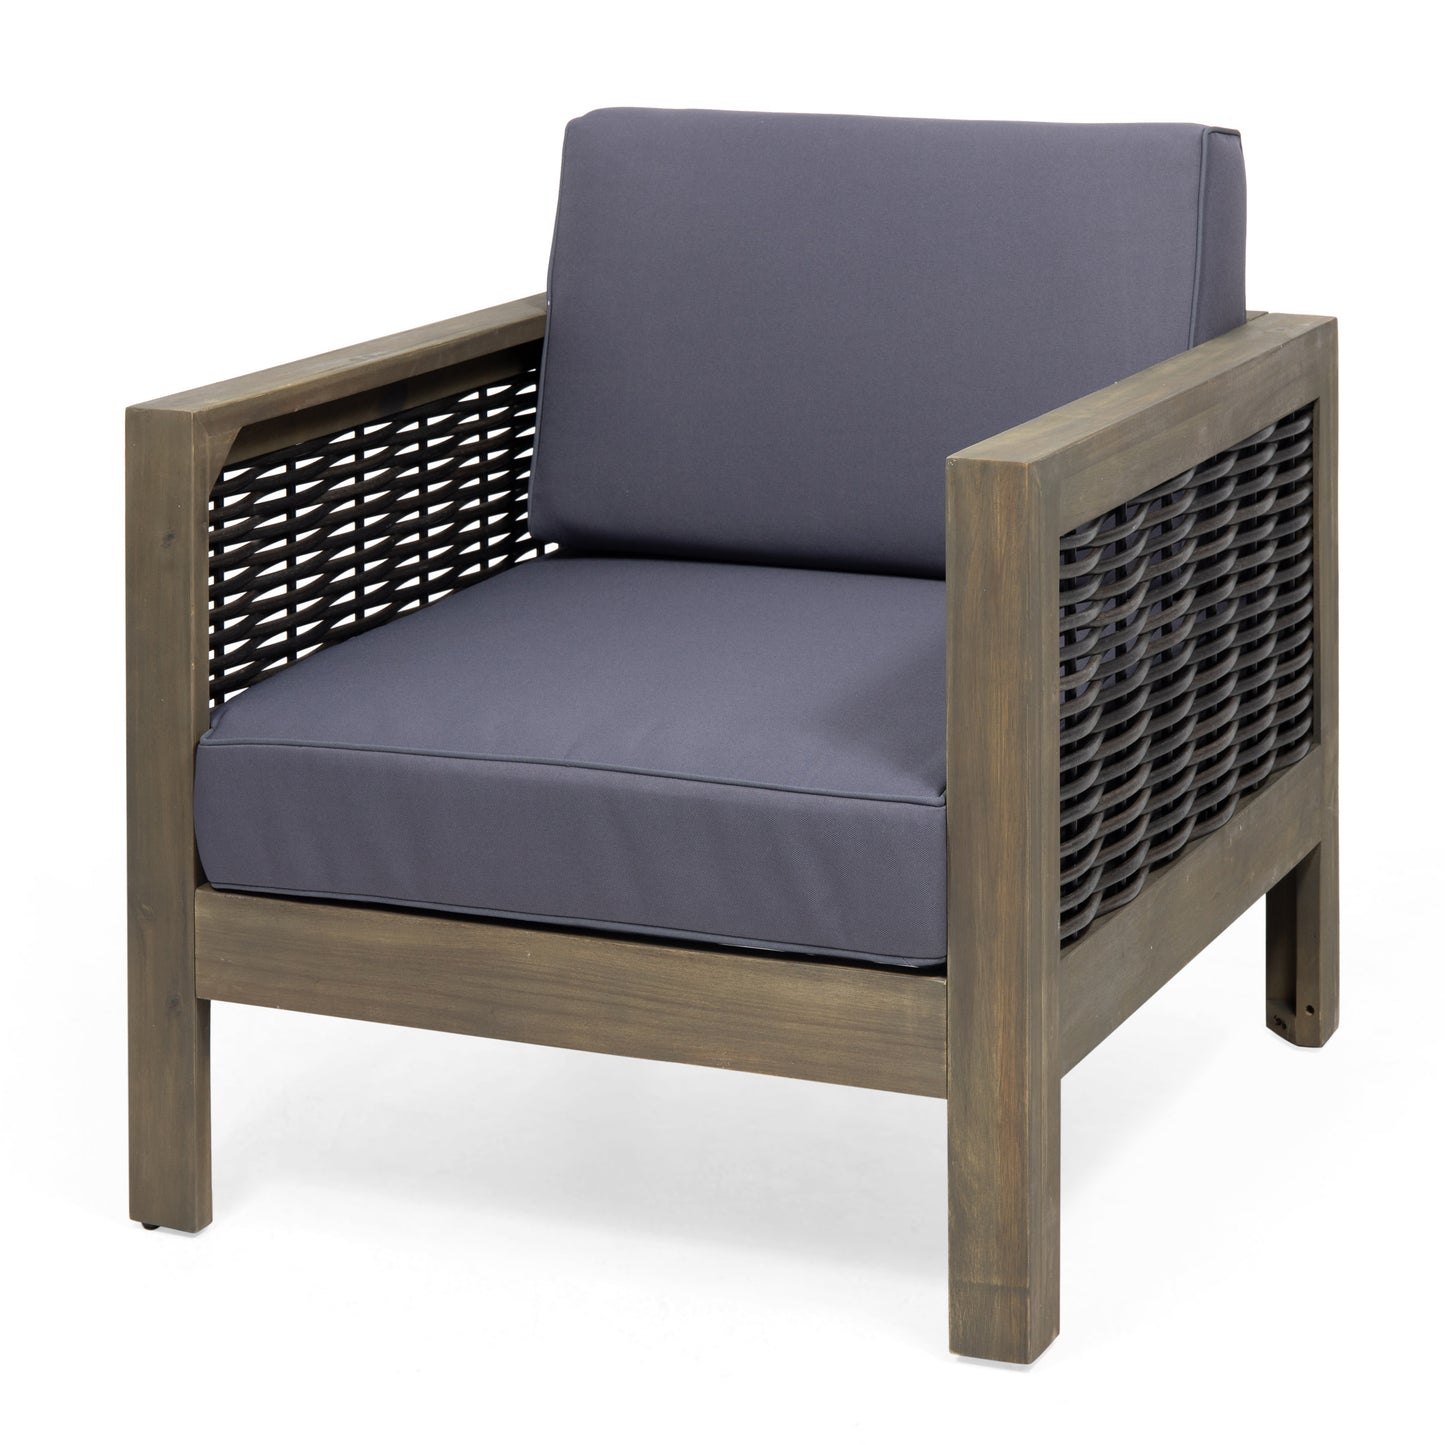 Allegra Outdoor Acacia Wood and Wicker Club Chair